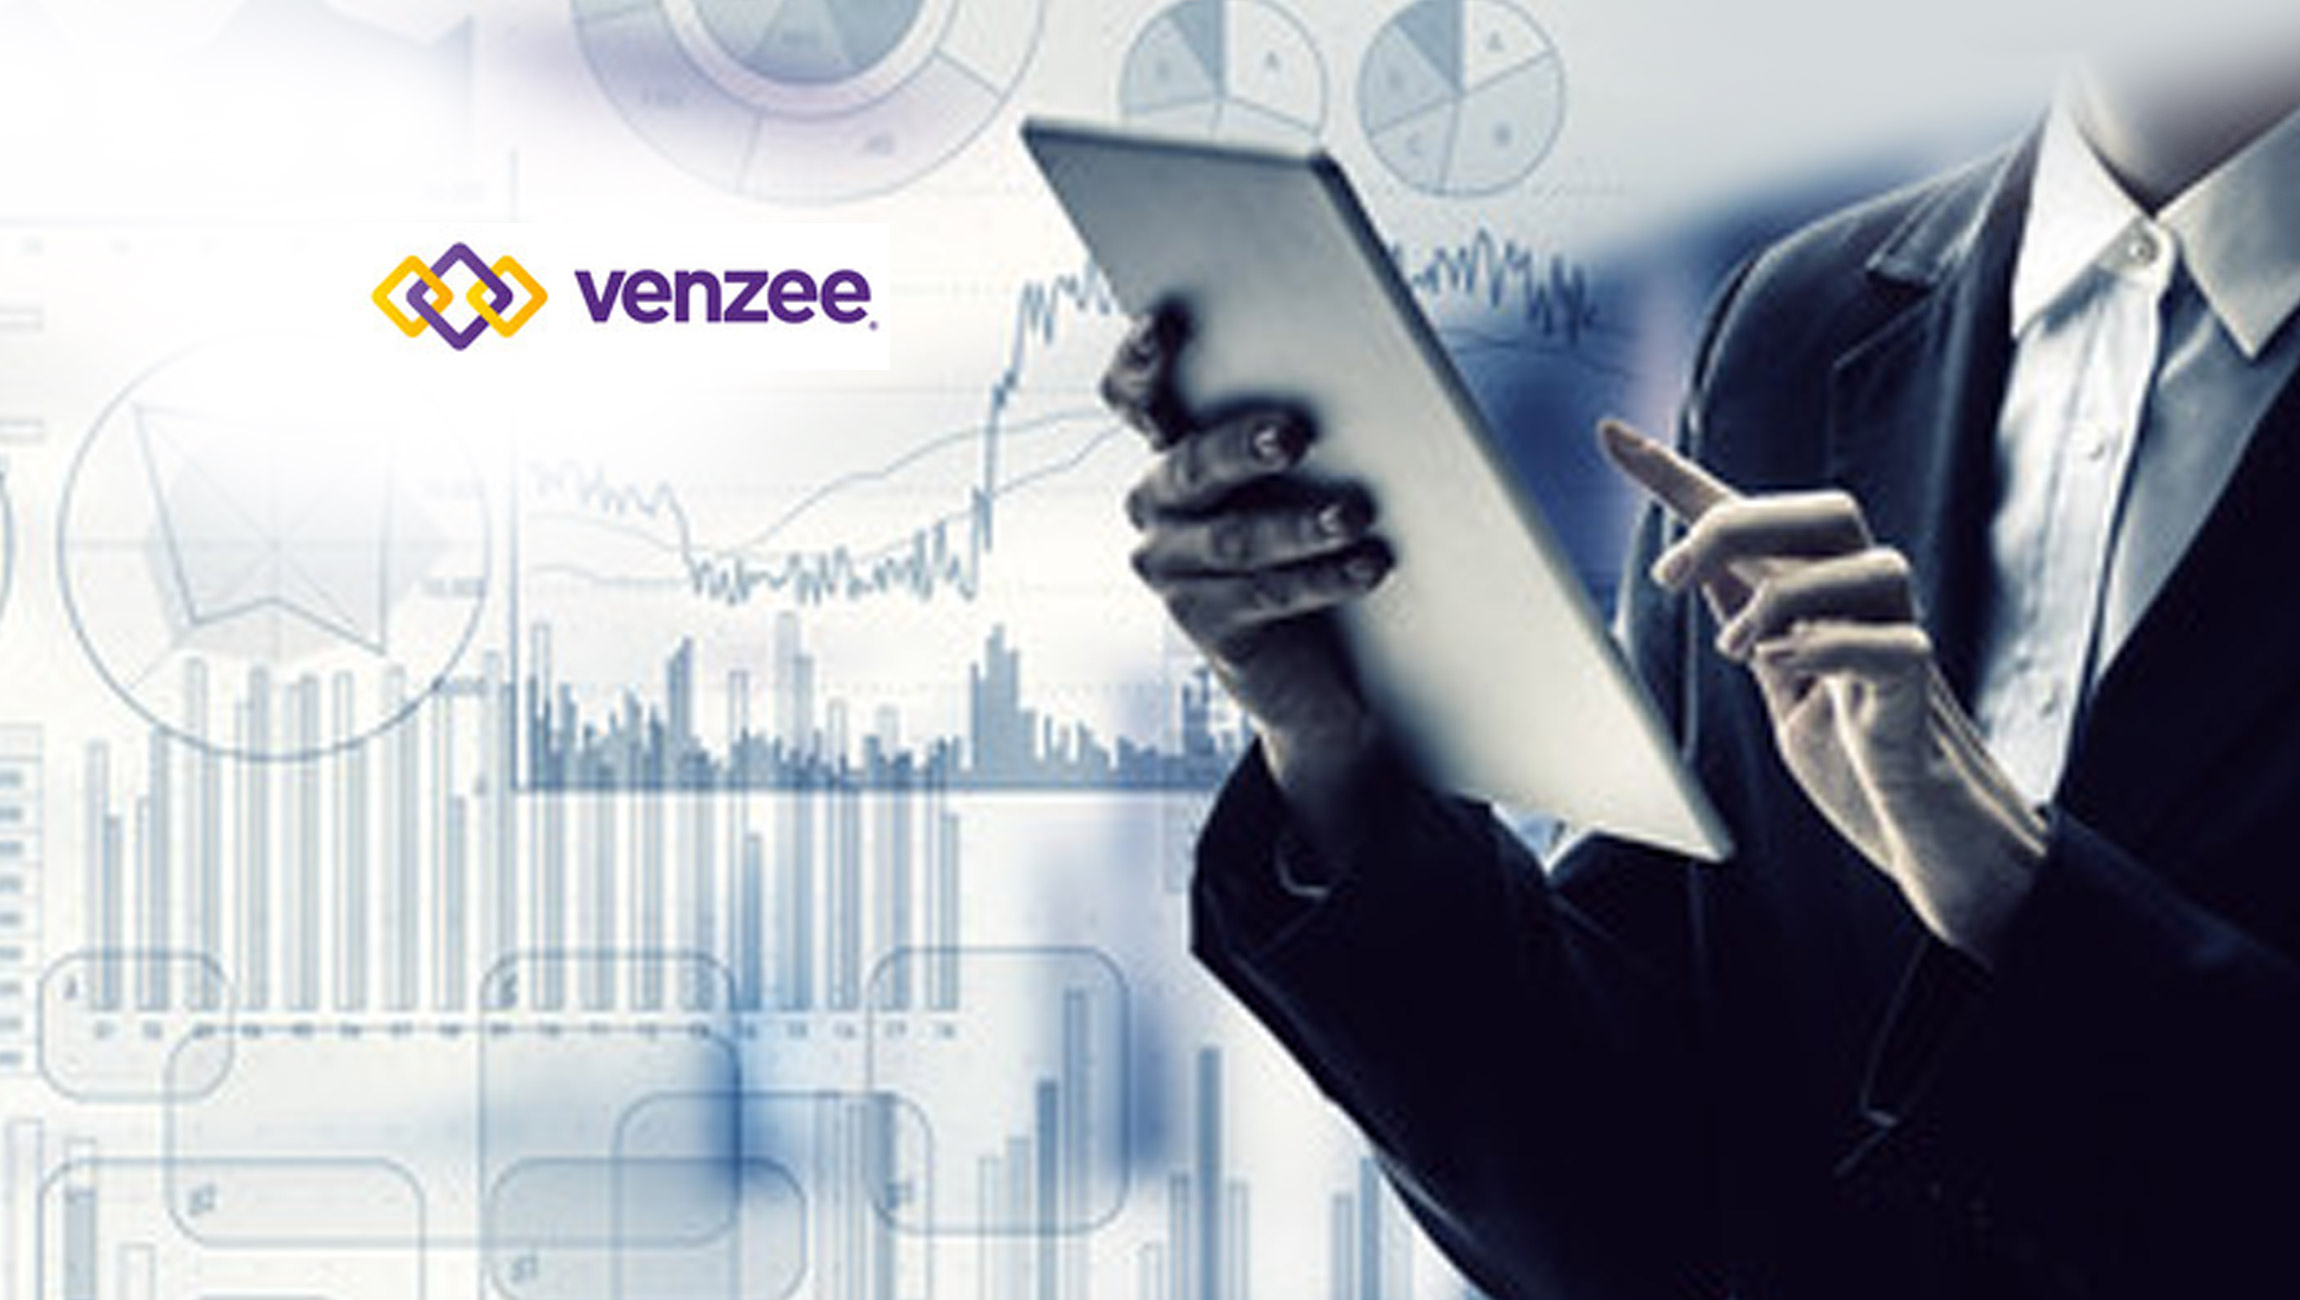 Venzee Signs New Upfront Revenue-Based Contract with Enterprise Solution Provider